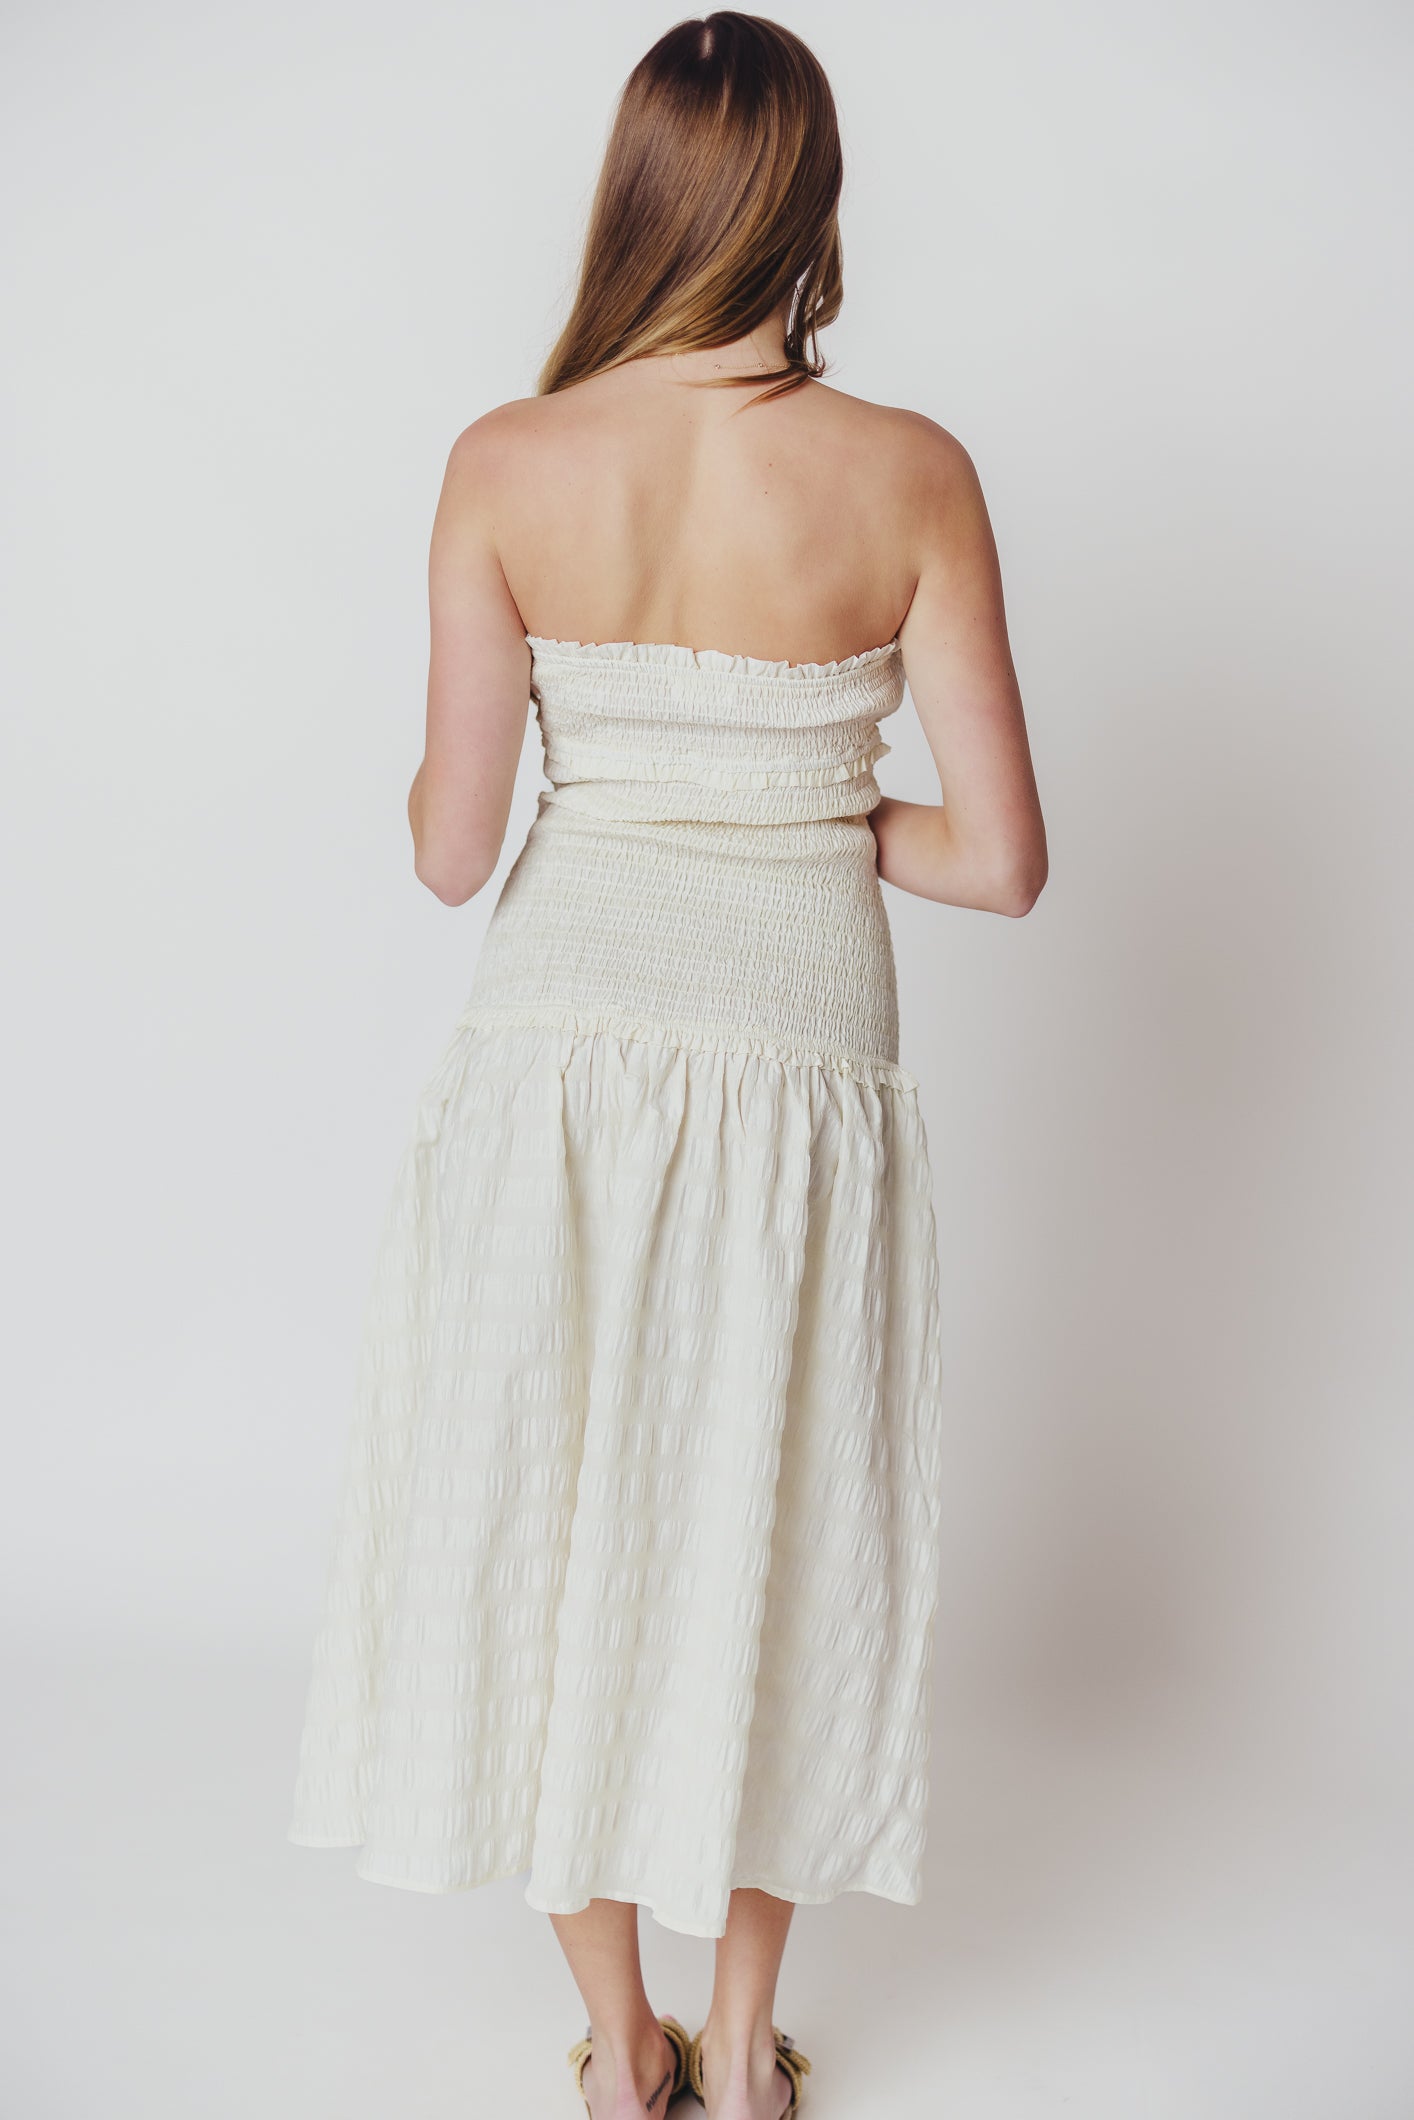 Whitley Strapless Sweetheart Midi Dress in Ivory